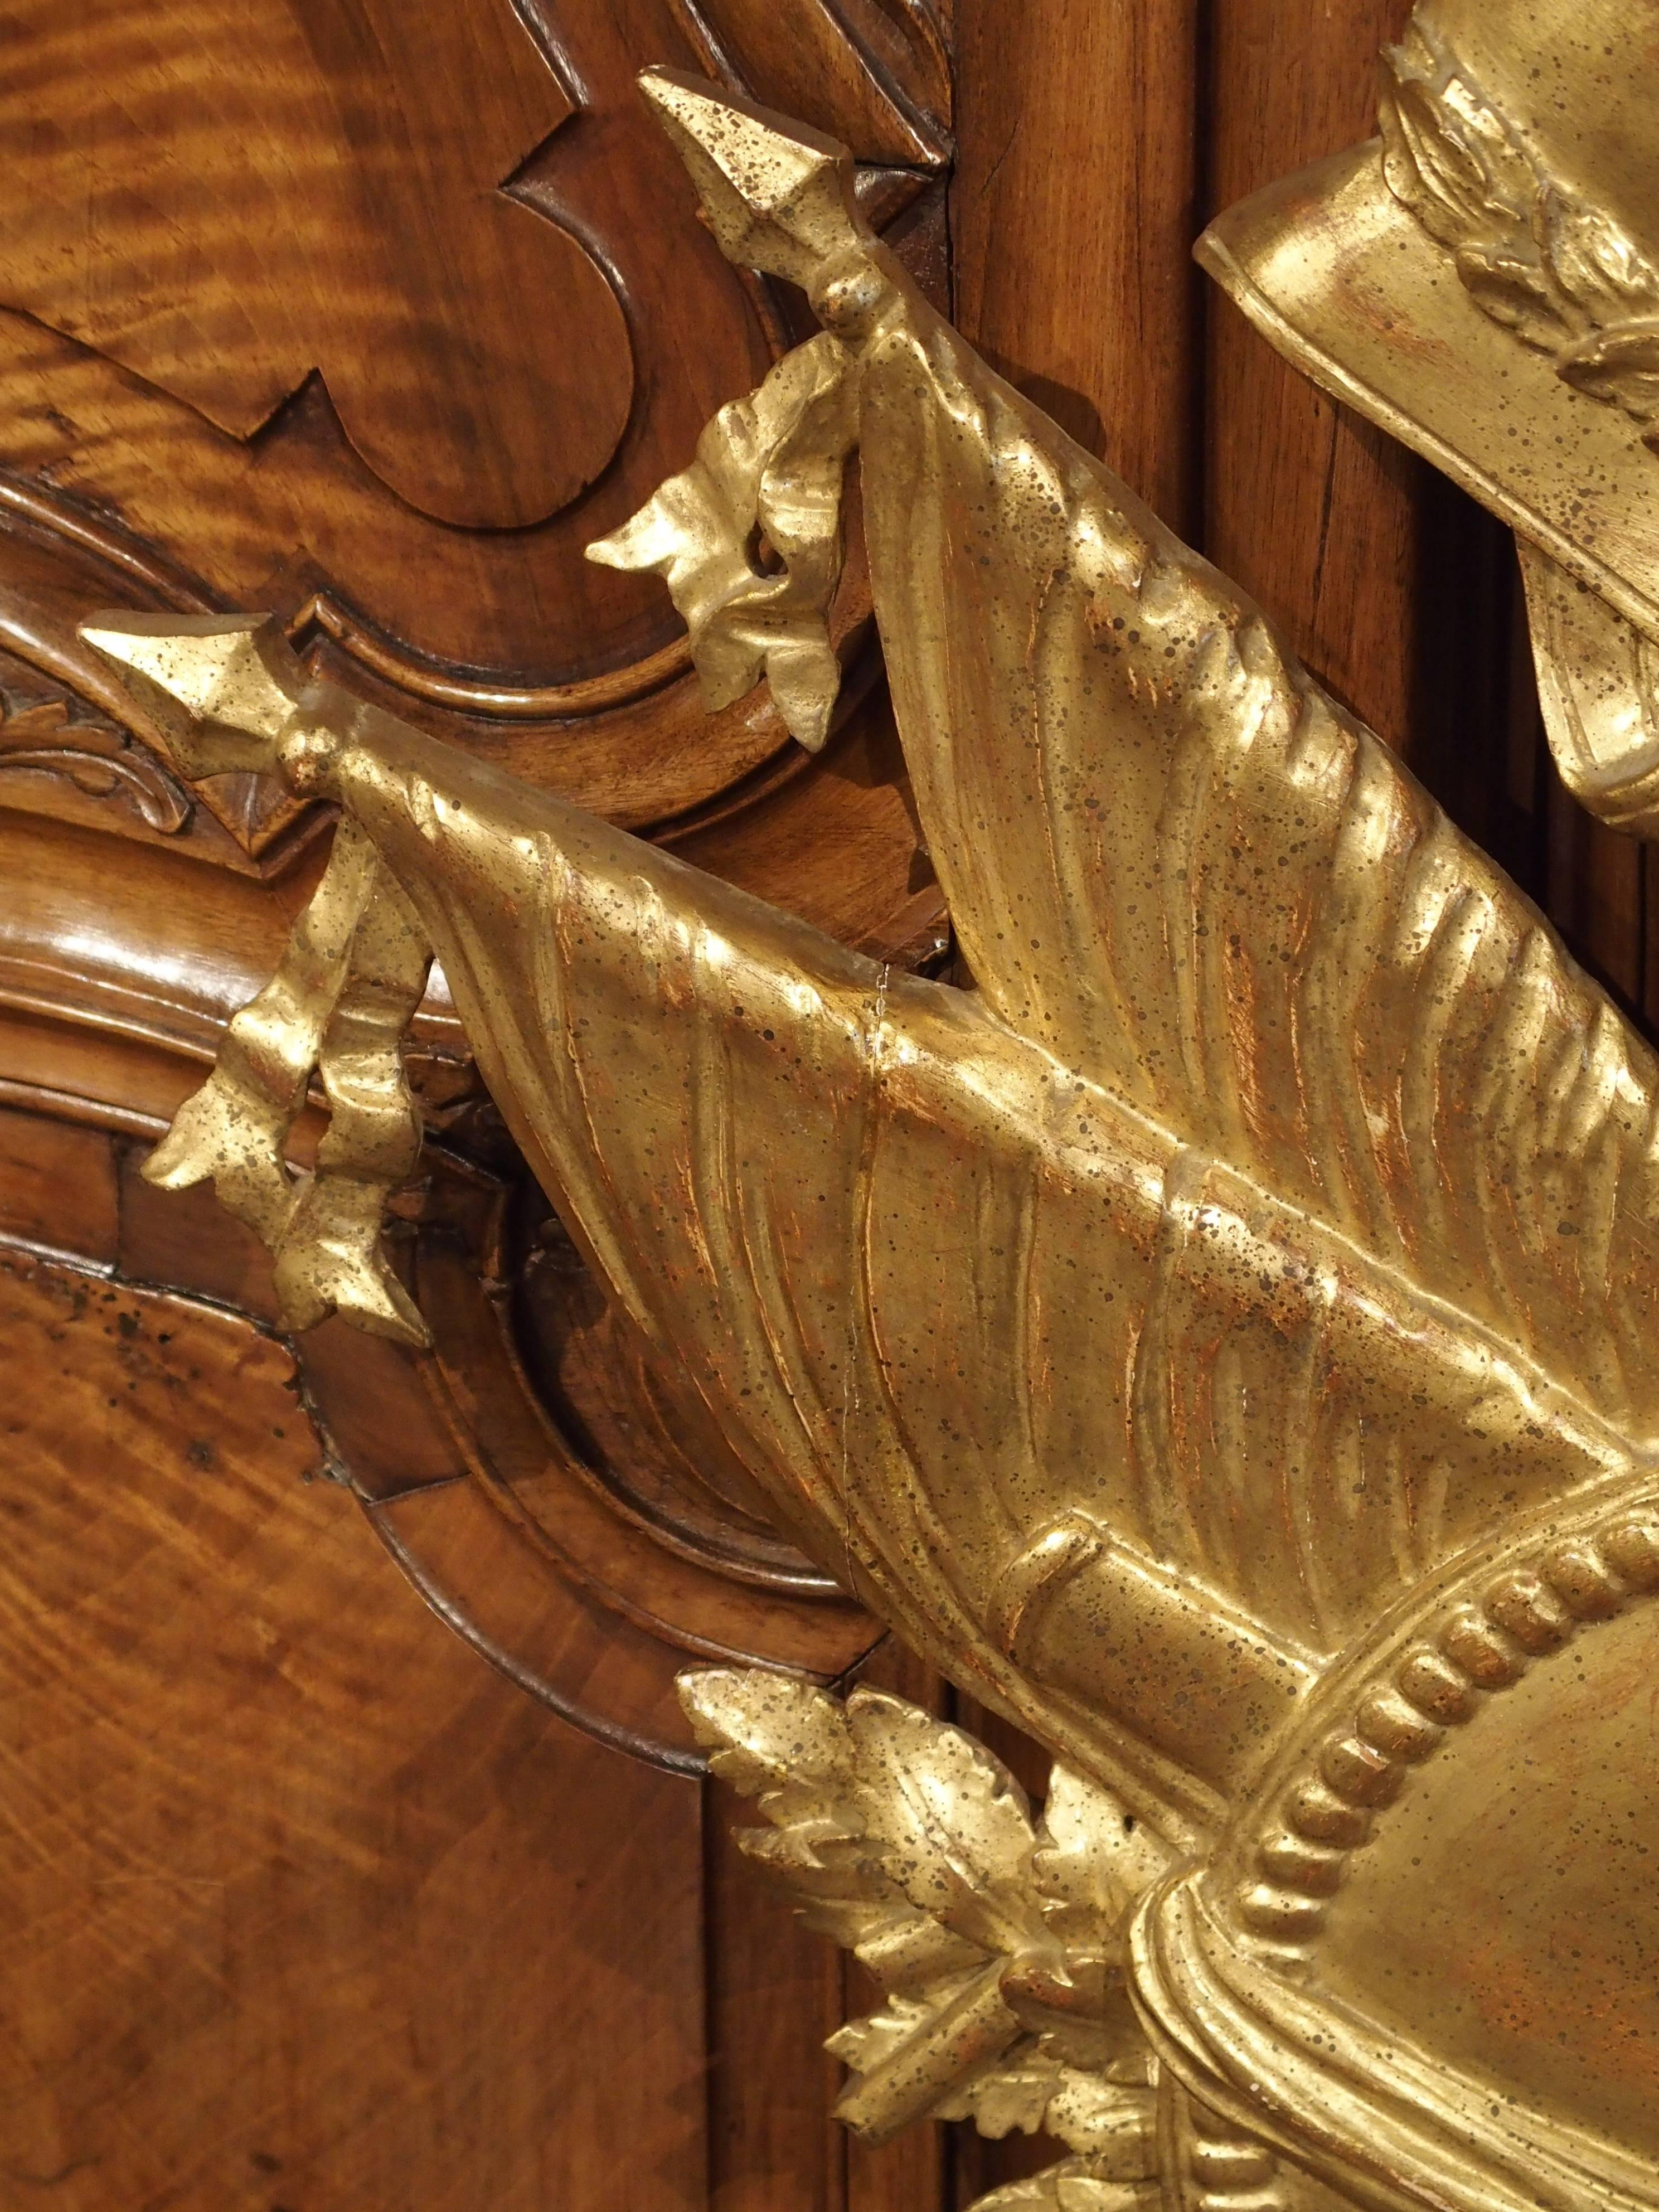 This stunning giltwood piece is known as a military trophy. It is carved and gilded wood and made in Italy, in the 1900s. This type of piece would have been intended for decorating a wall, an overmantel, or even an overdoor. The depiction of